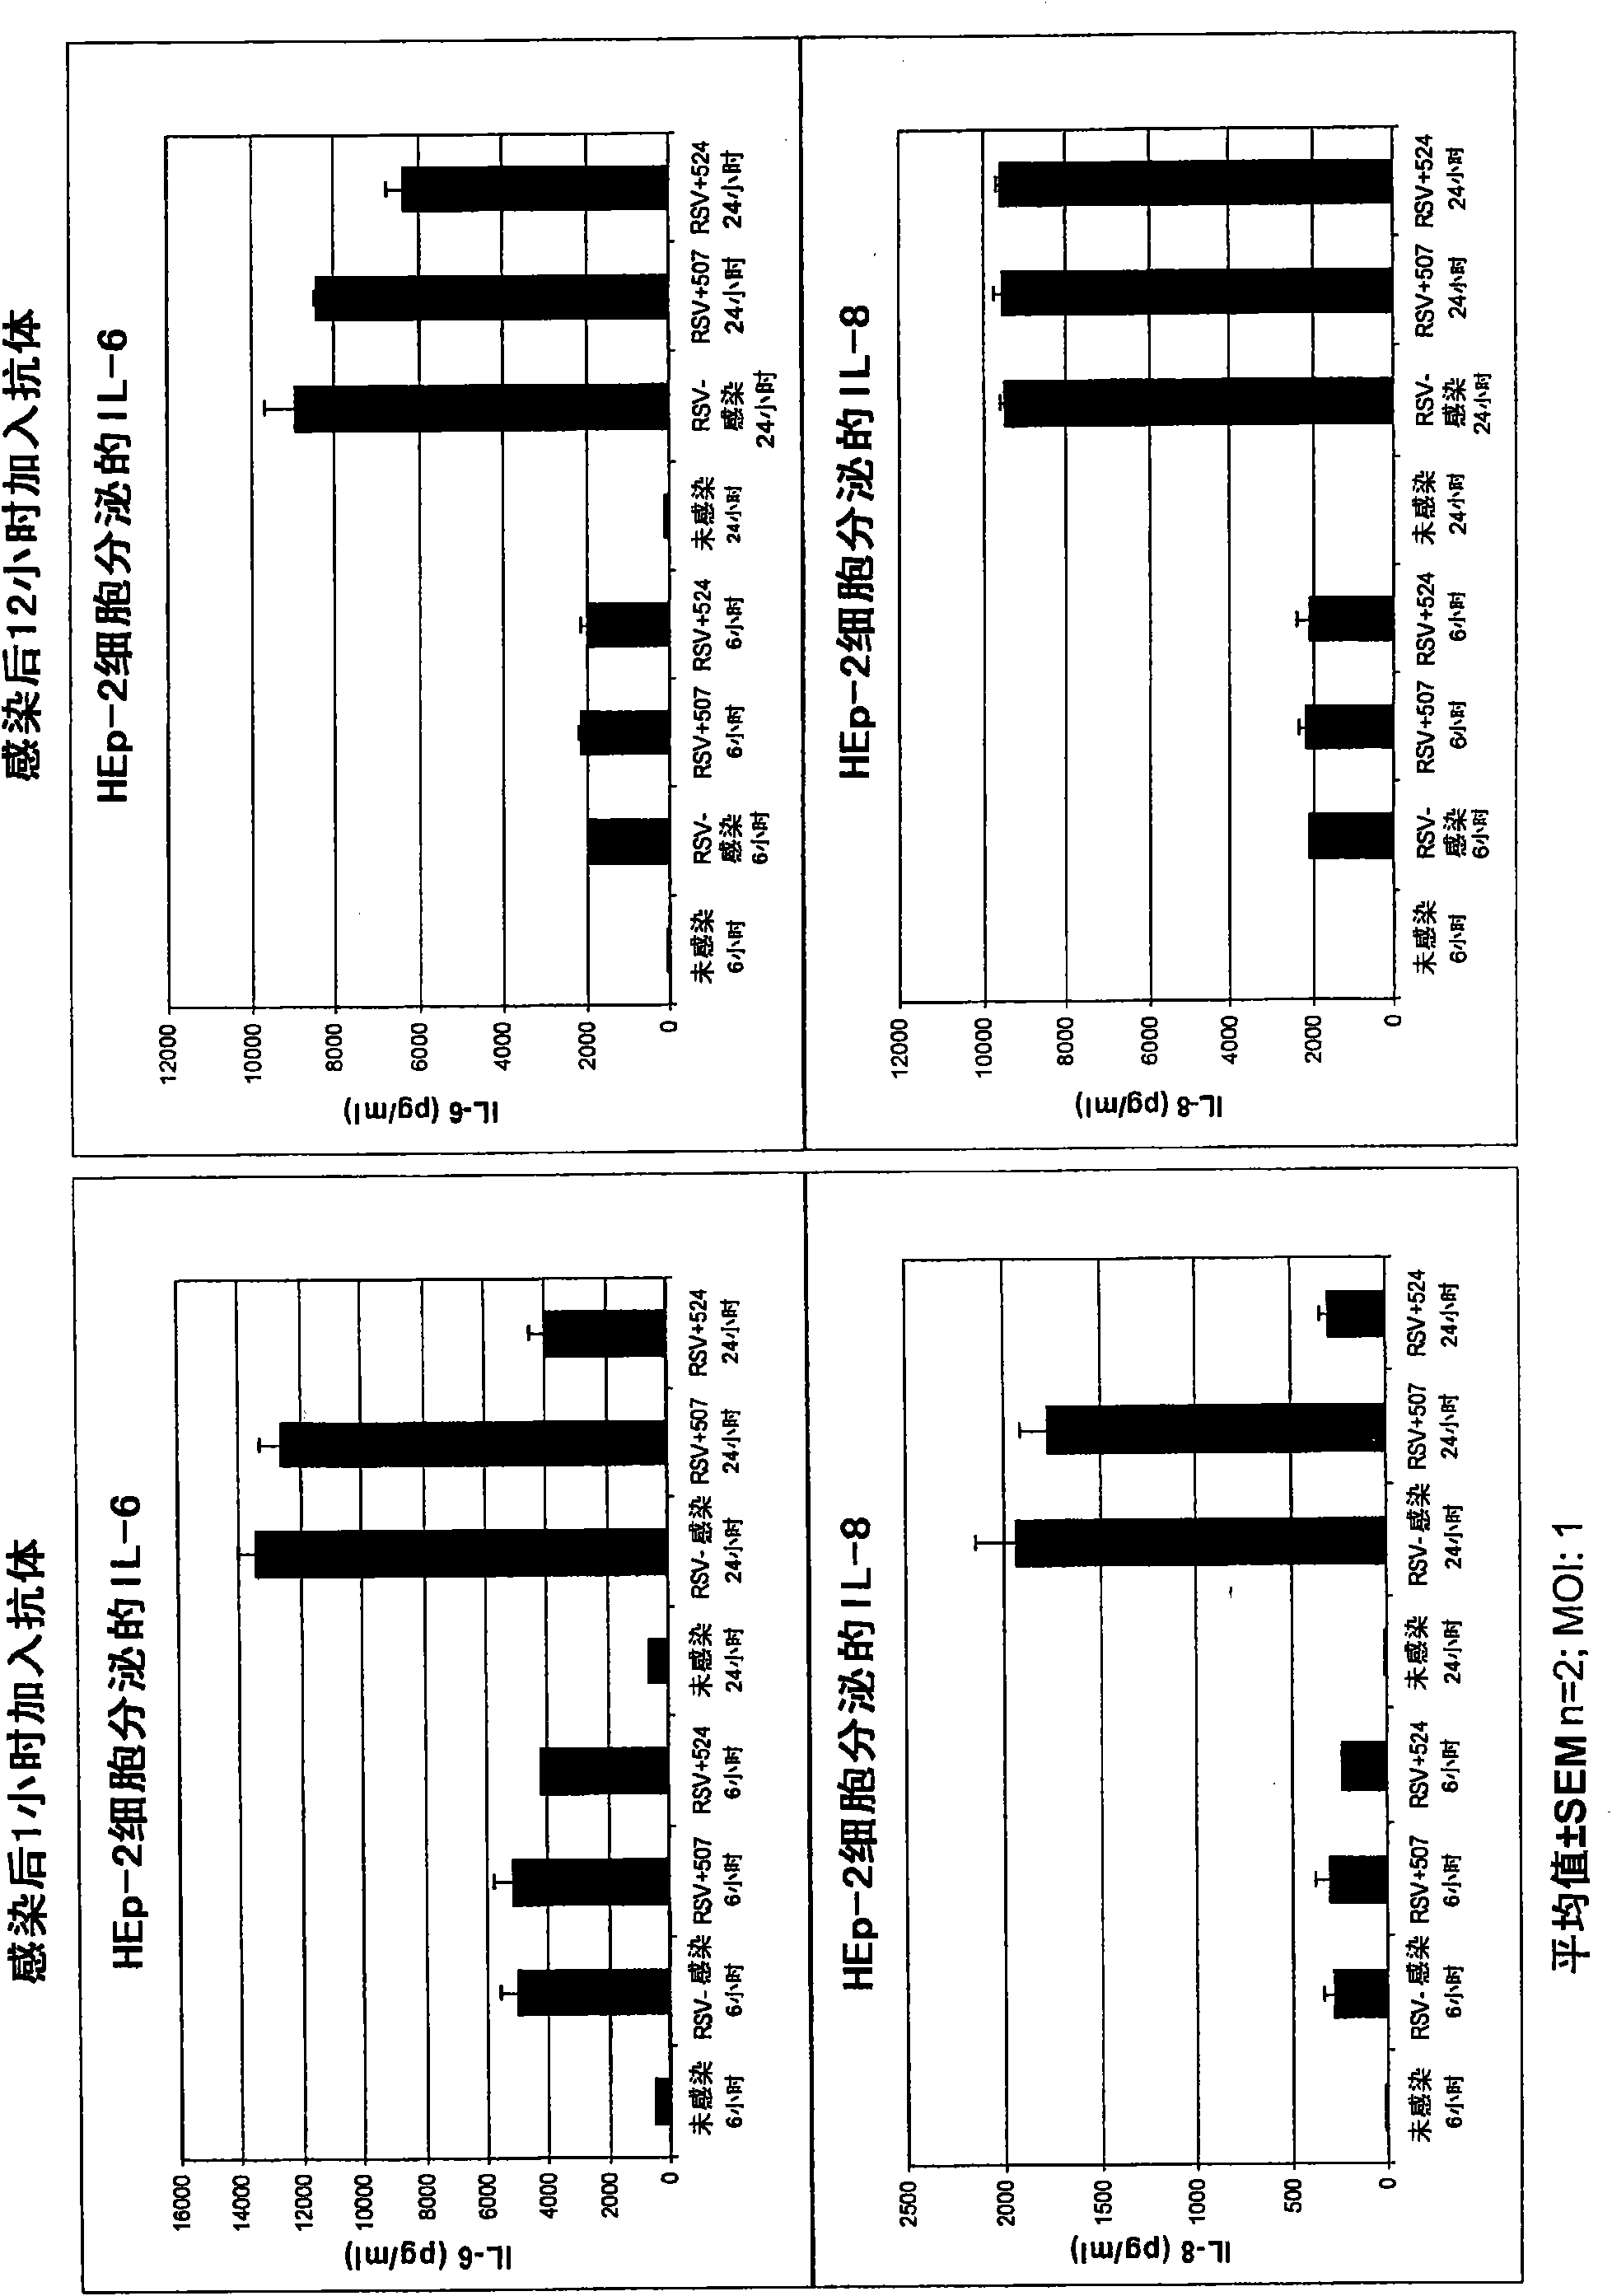 Methods of treating RSV infections and related conditions